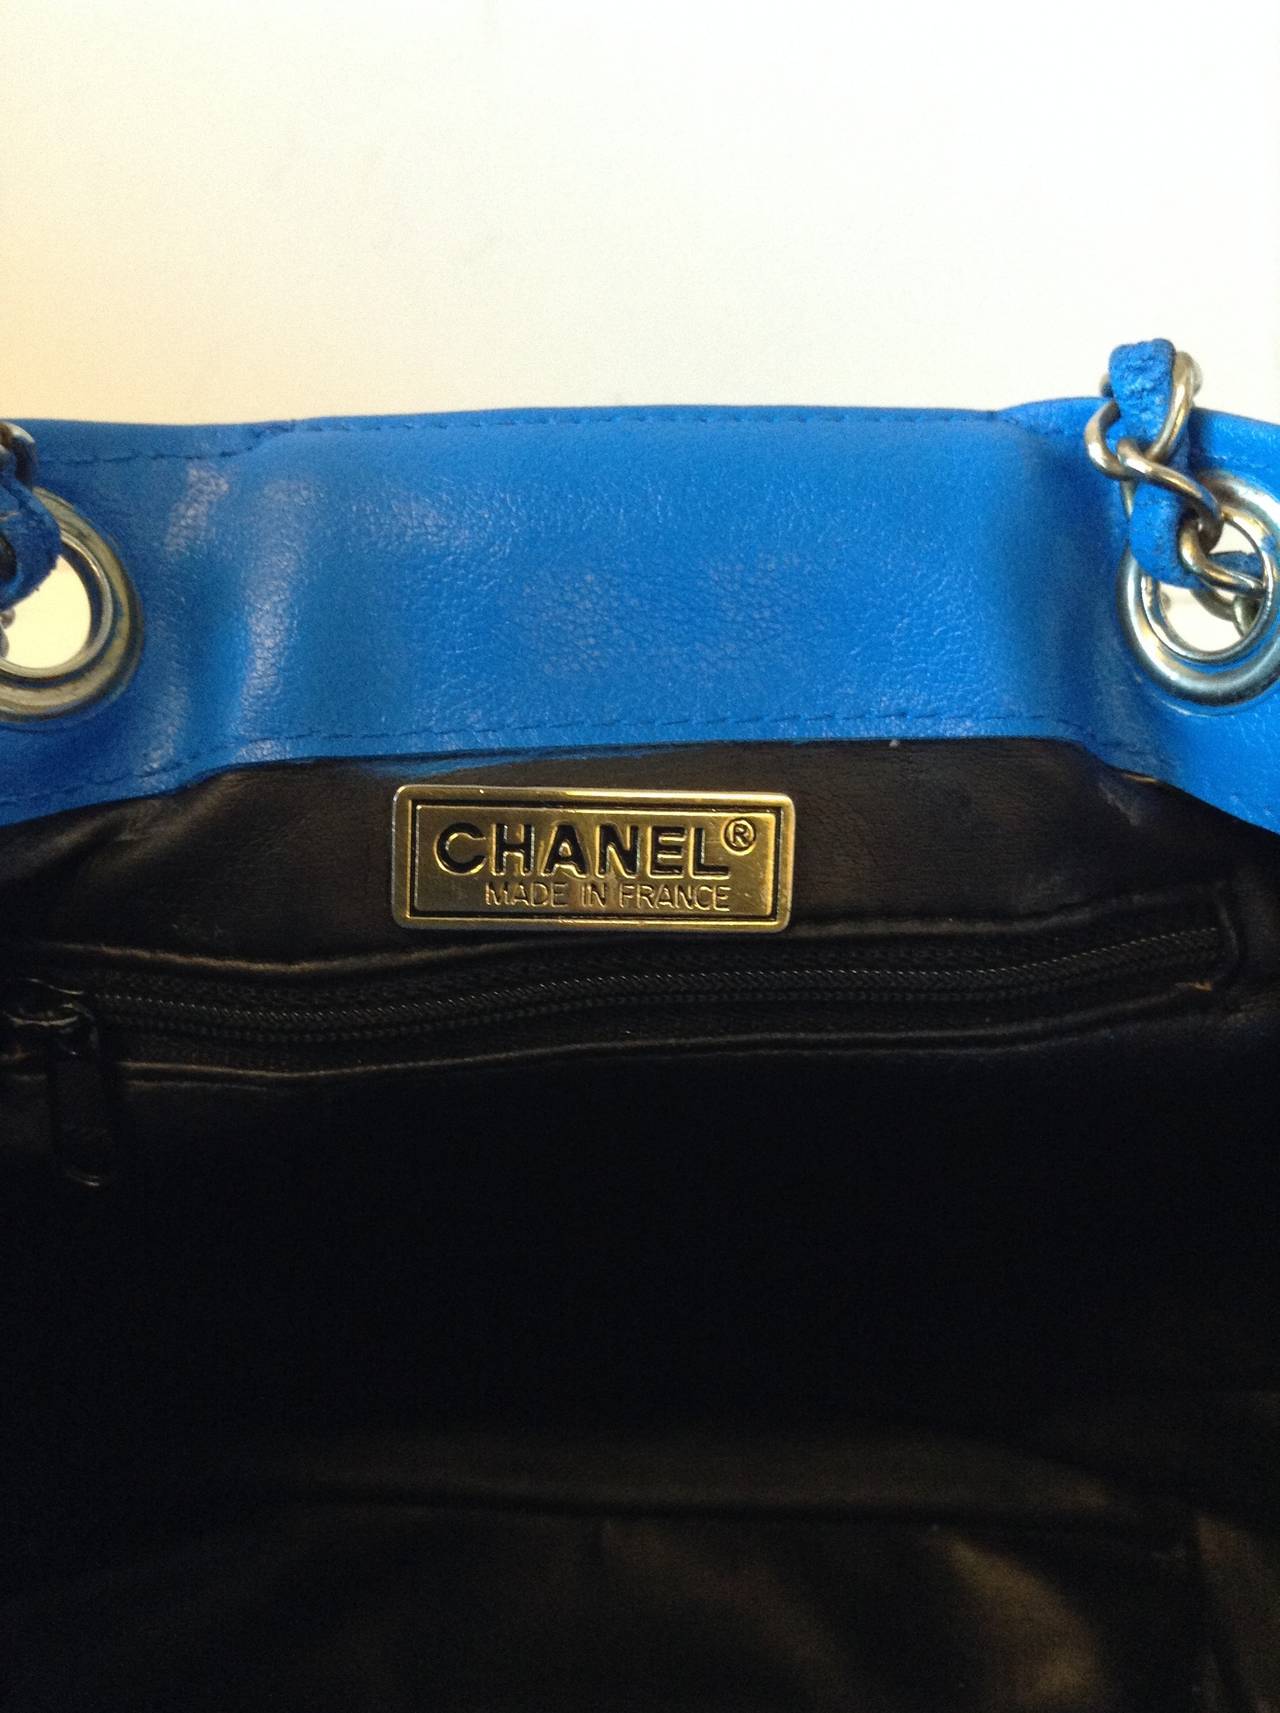 Chanel Electric Blue Large Drawstring Bucket Bag with Flap Closure For Sale 4